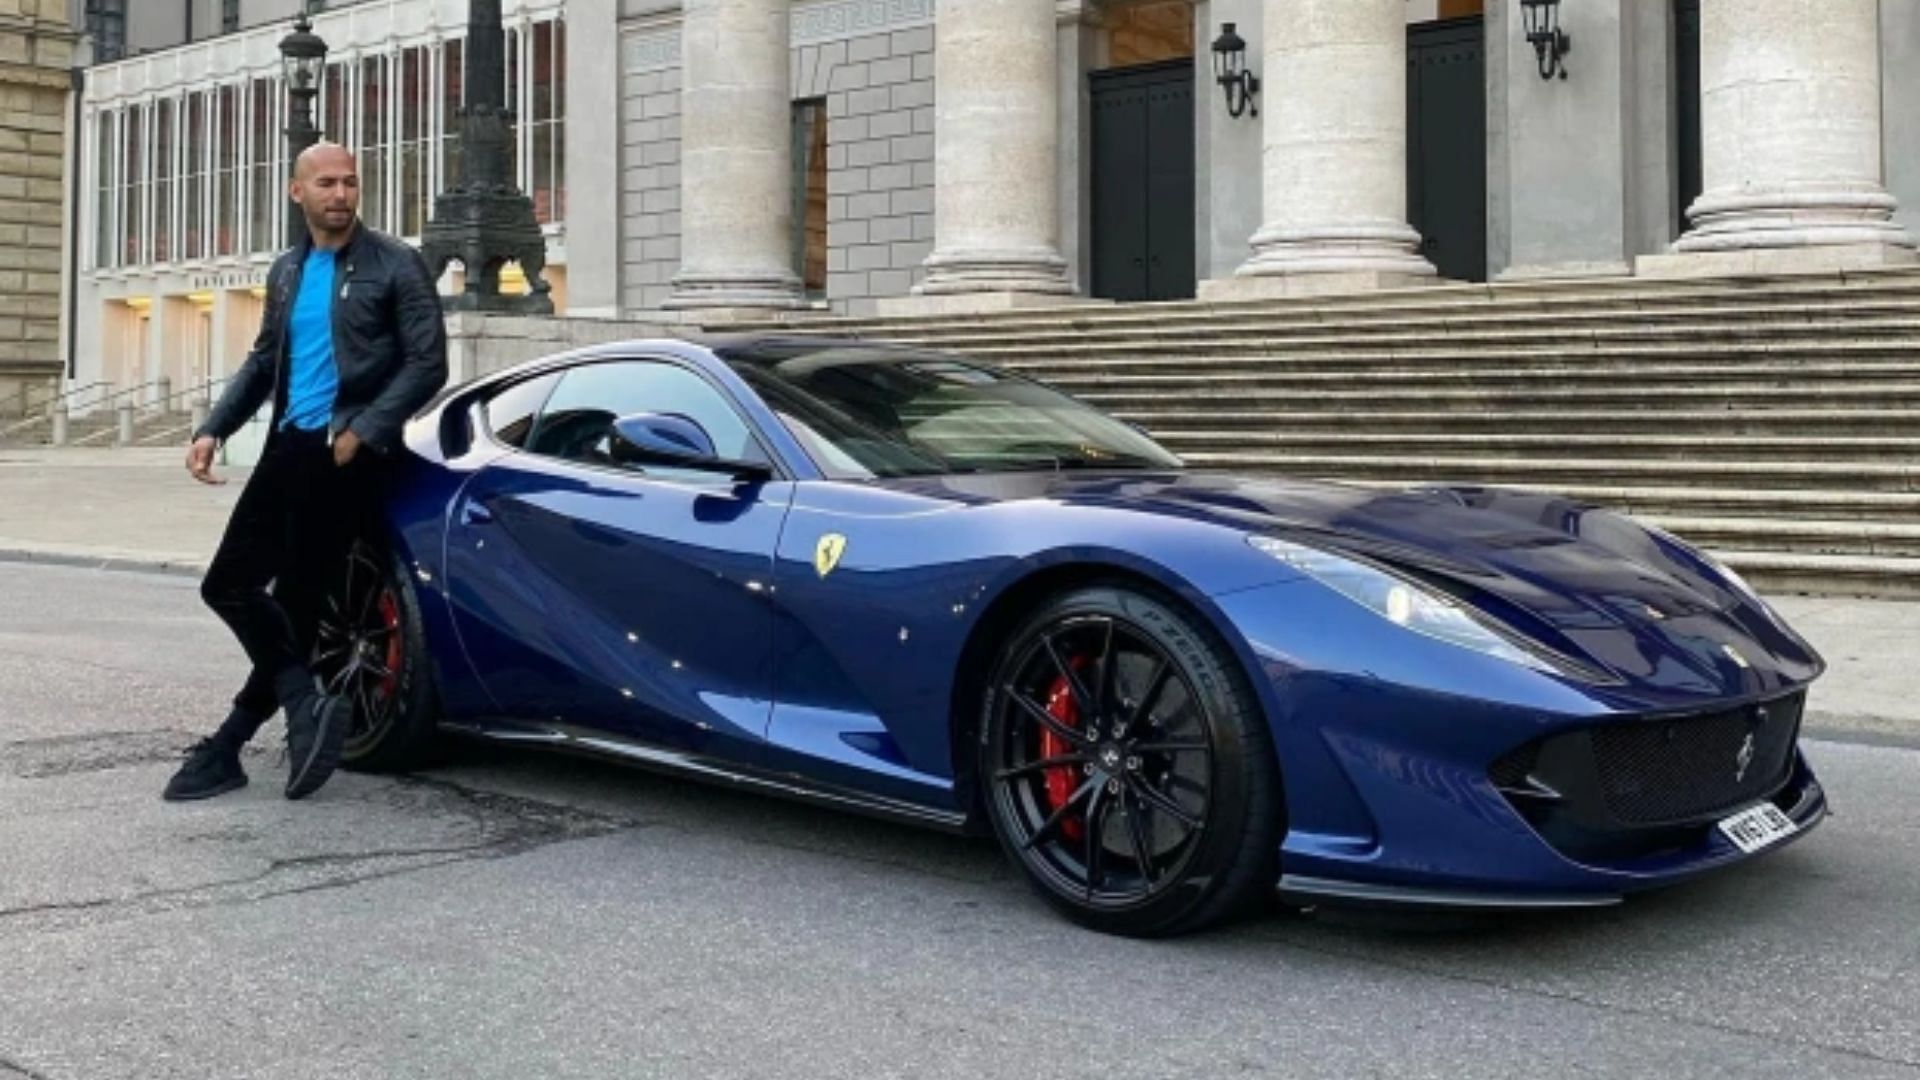 Tate & # 039;  s Blue Ferrari 812 Superfast is a thing of beauty (Image via Instagram)